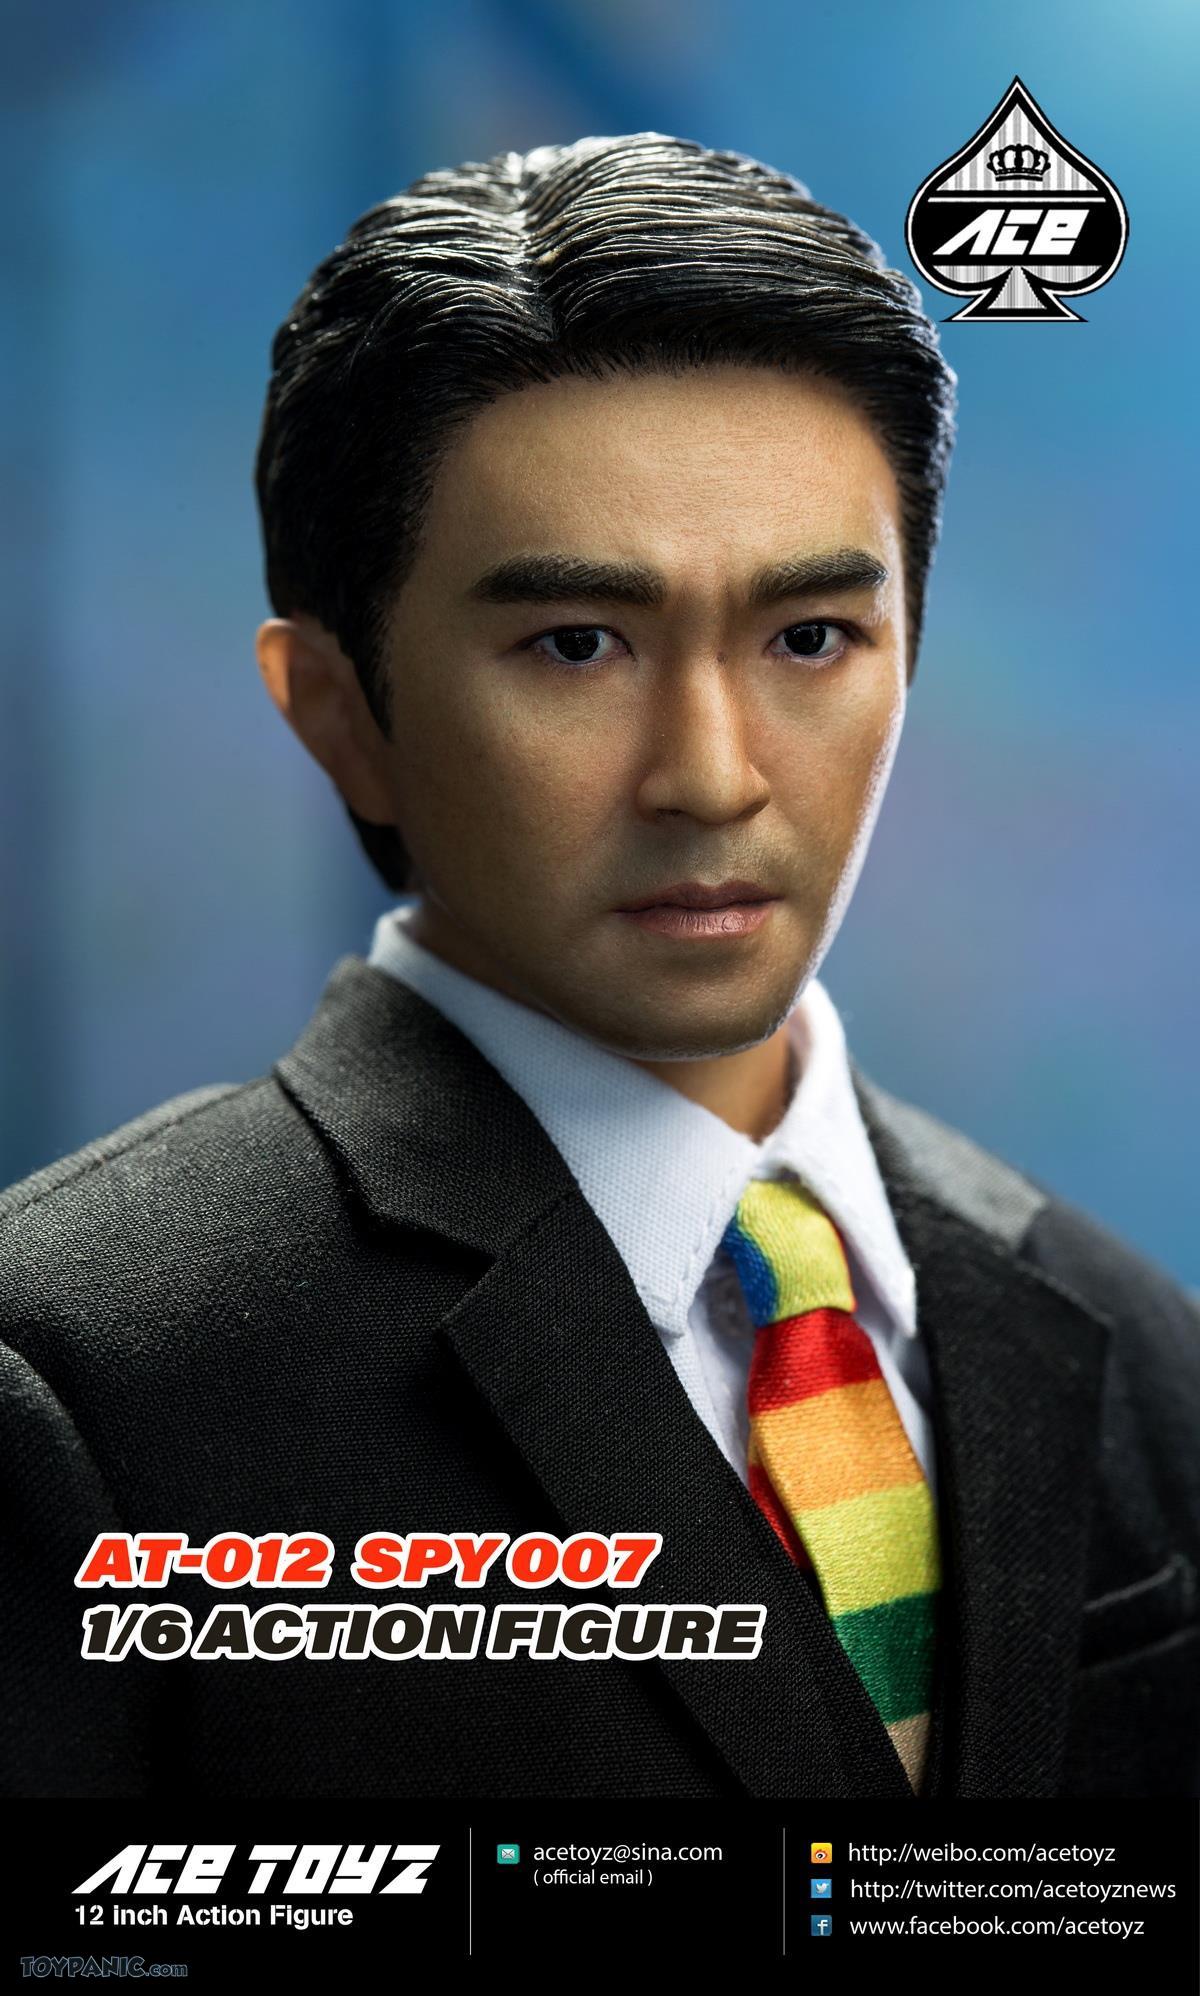 NEW PRODUCT: 1/6 scale Spy 007 Action Figure from Acetoyz  3011202210229AM_7006621